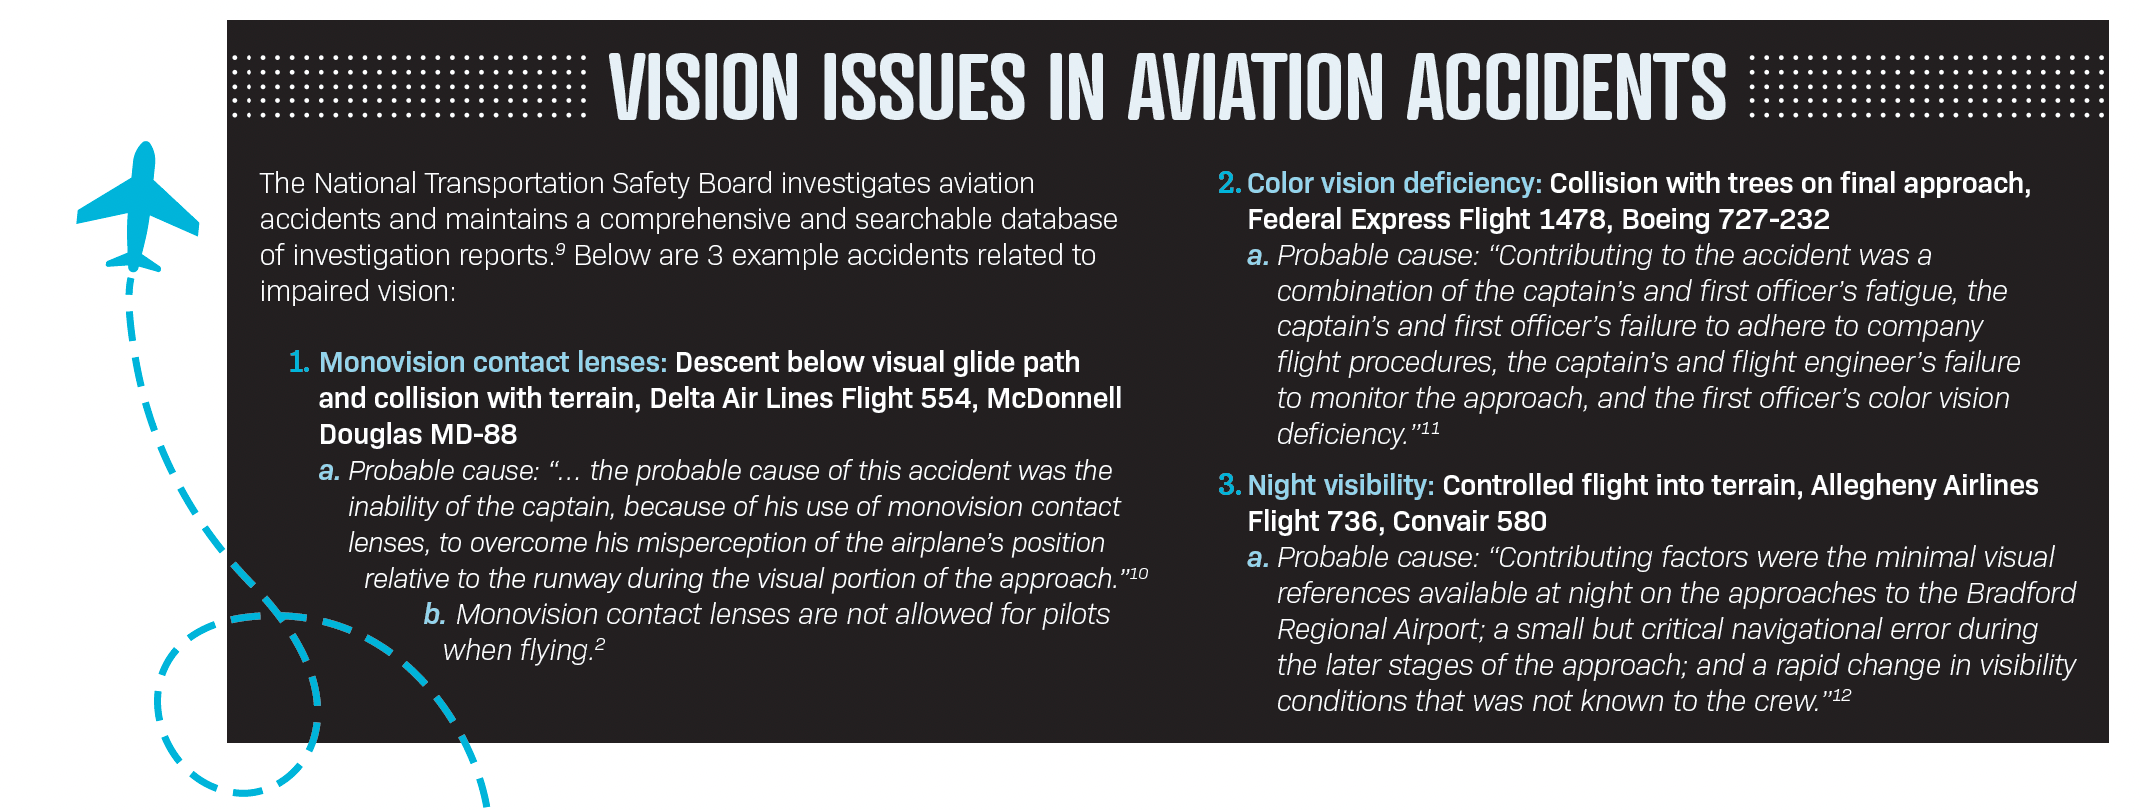 vision issues in aviation accidents